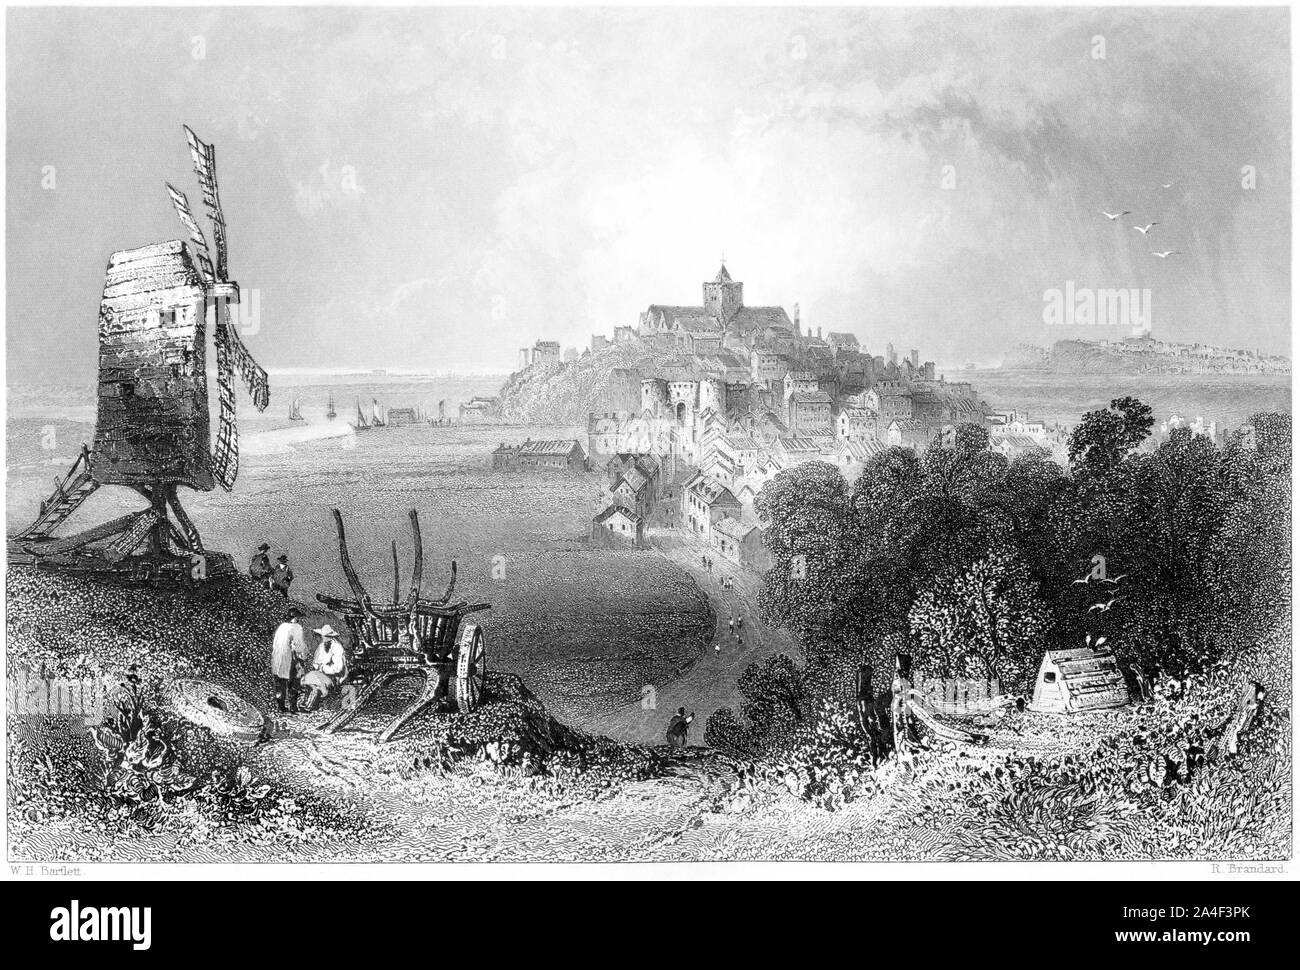 An engraving of Rye, Sussex UK scanned at high resolution from a book printed in 1842. Believed copyright free. Stock Photo